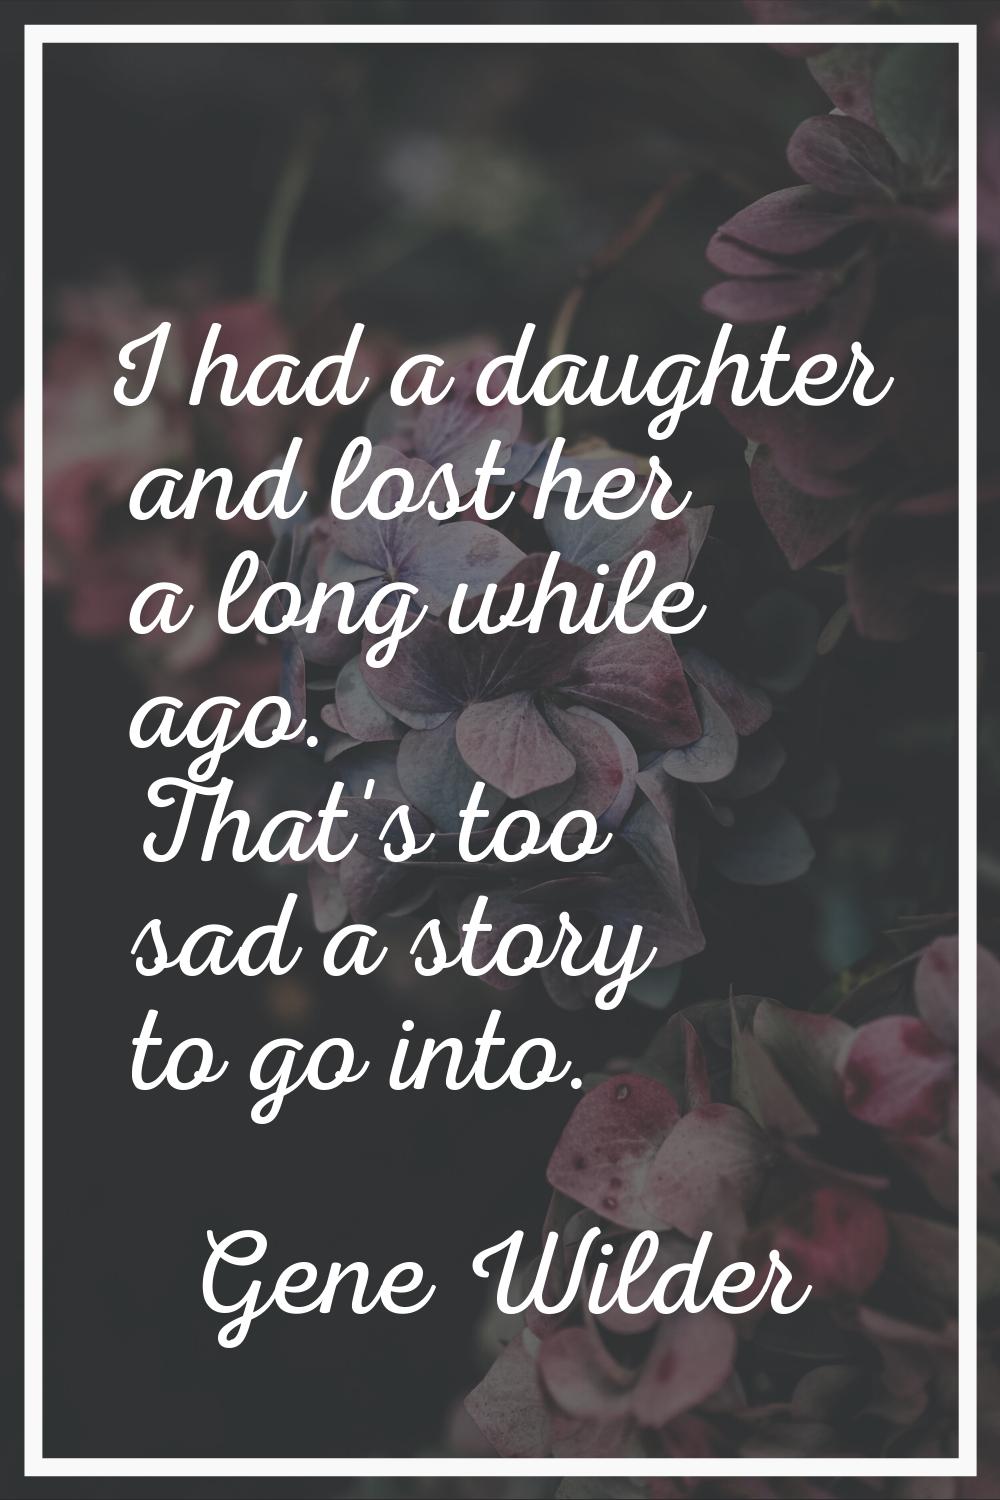 I had a daughter and lost her a long while ago. That's too sad a story to go into.